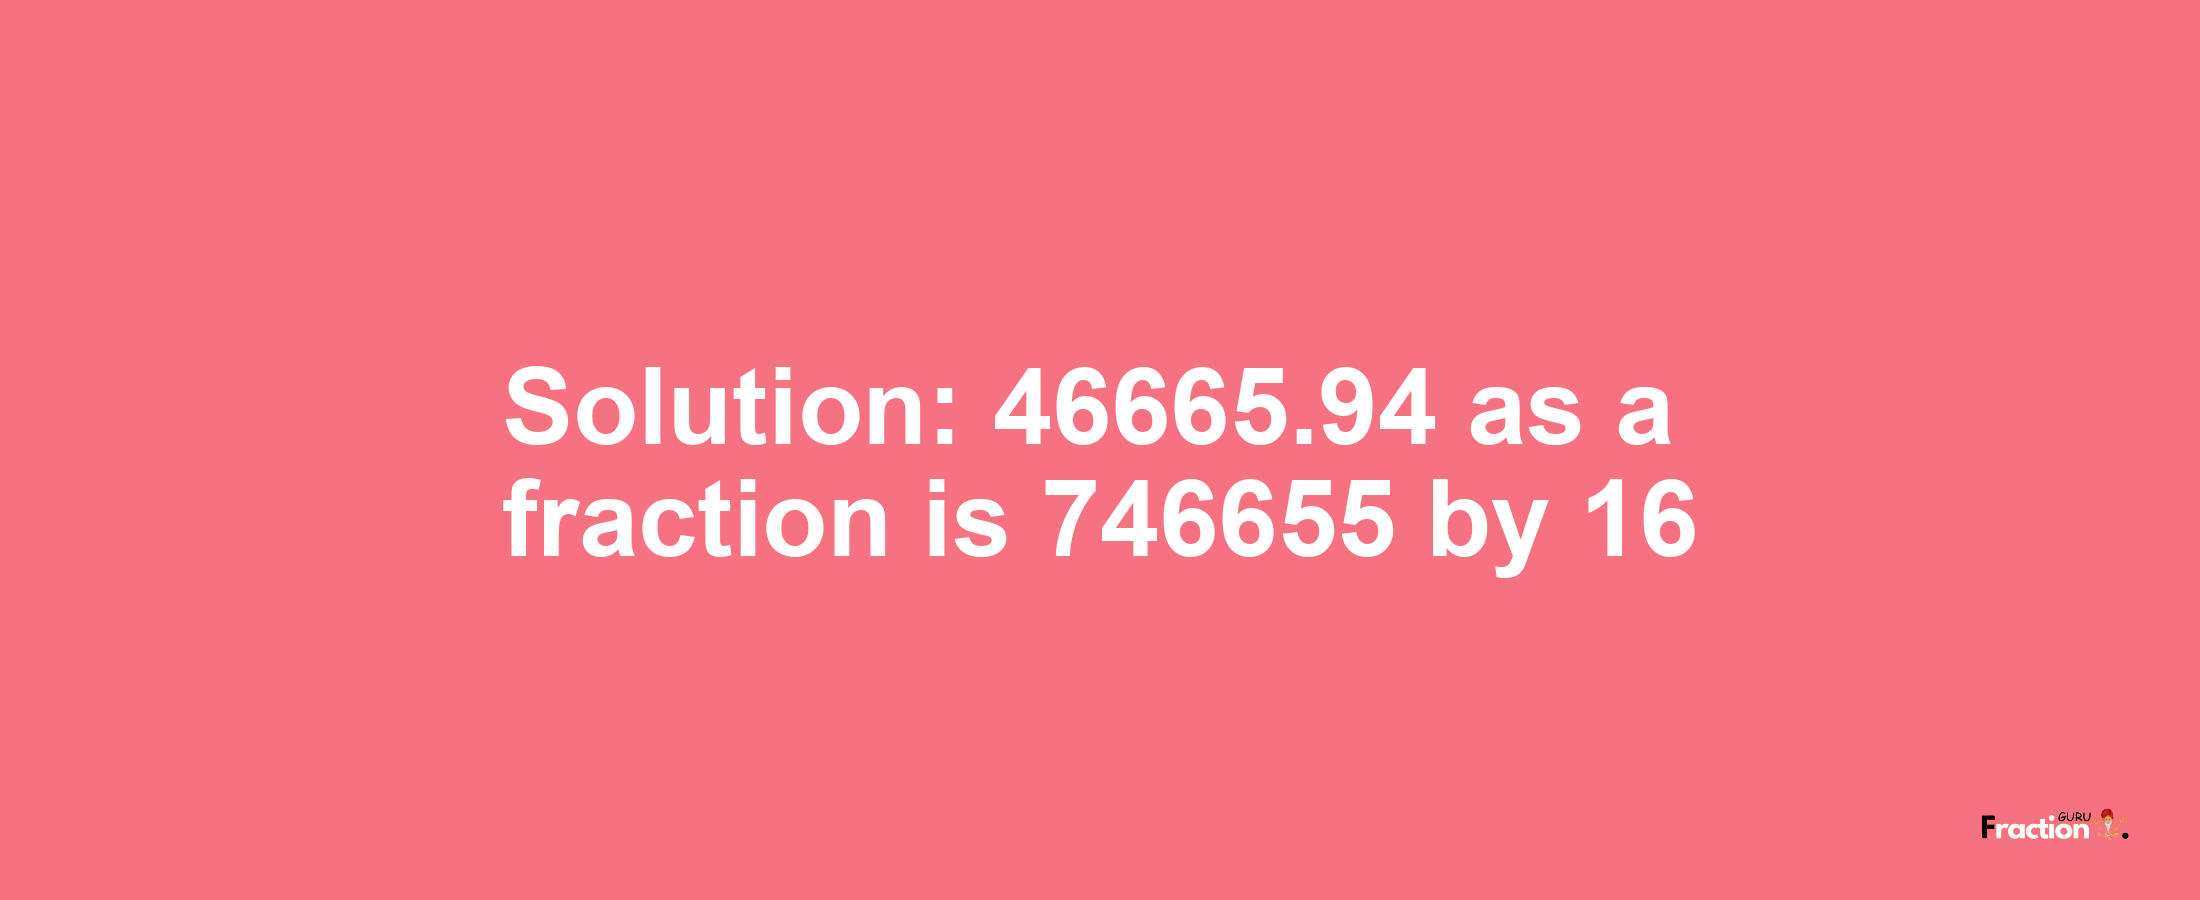 Solution:46665.94 as a fraction is 746655/16